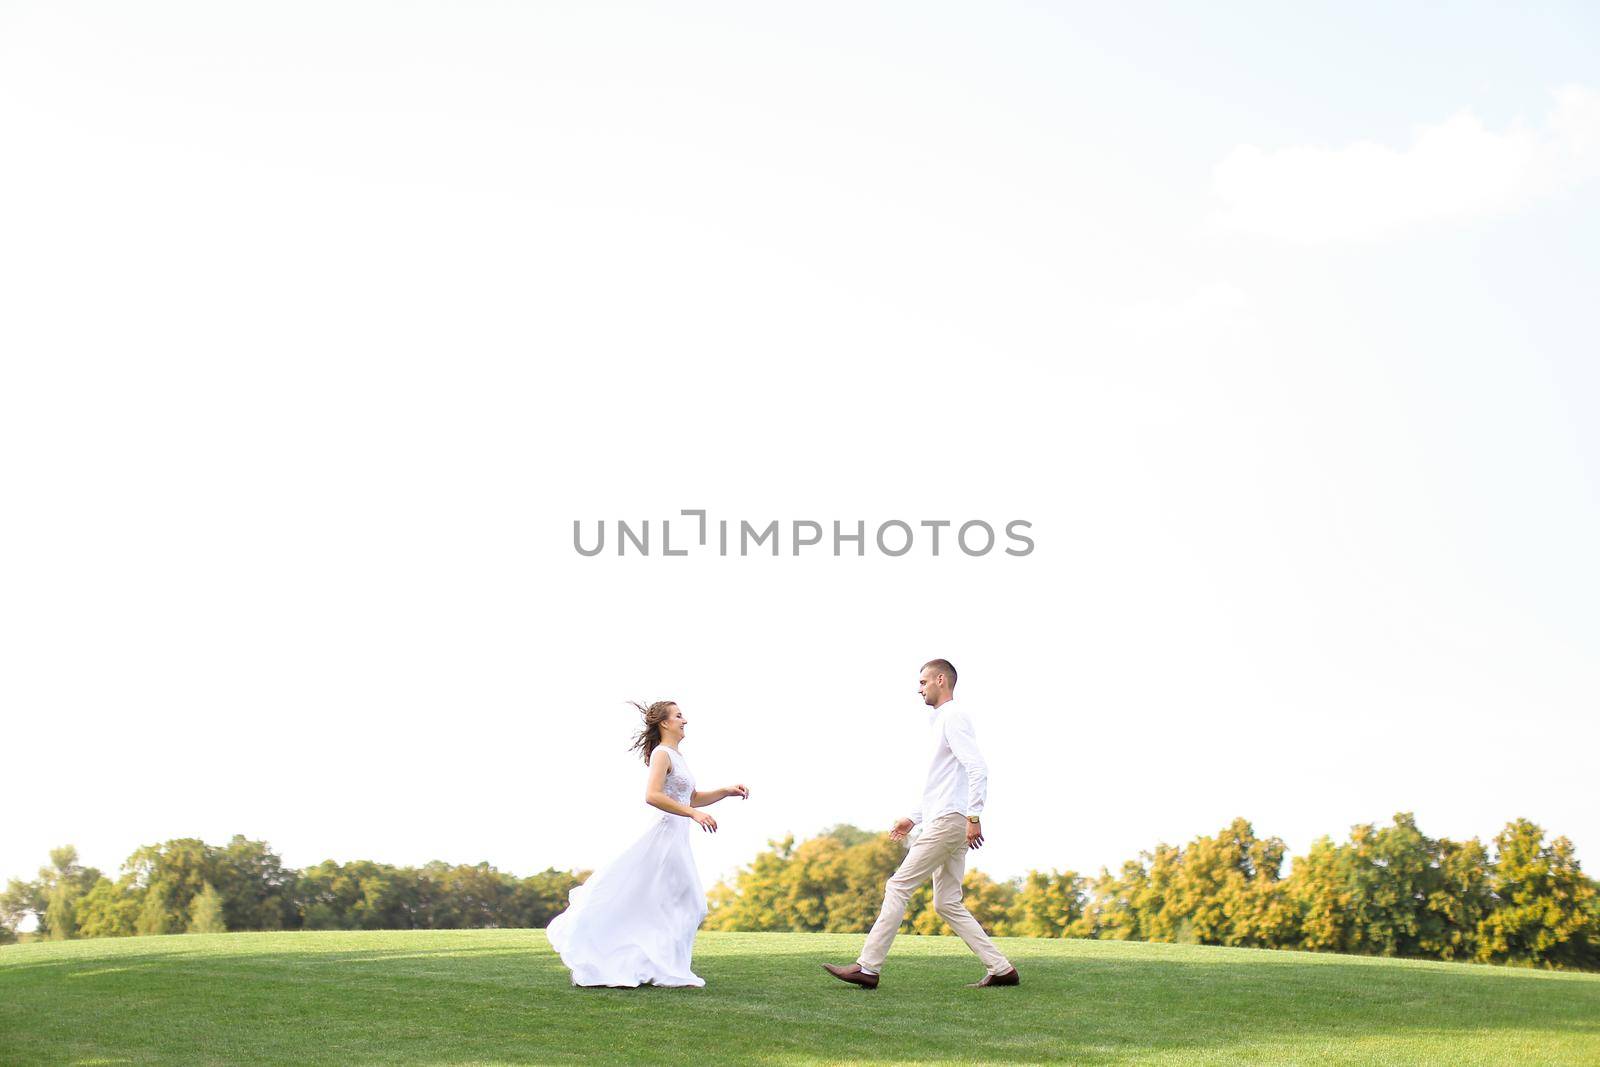 Happy bride and groom running to each other on grass in white sky background. Concept of wedding photo session on nature.